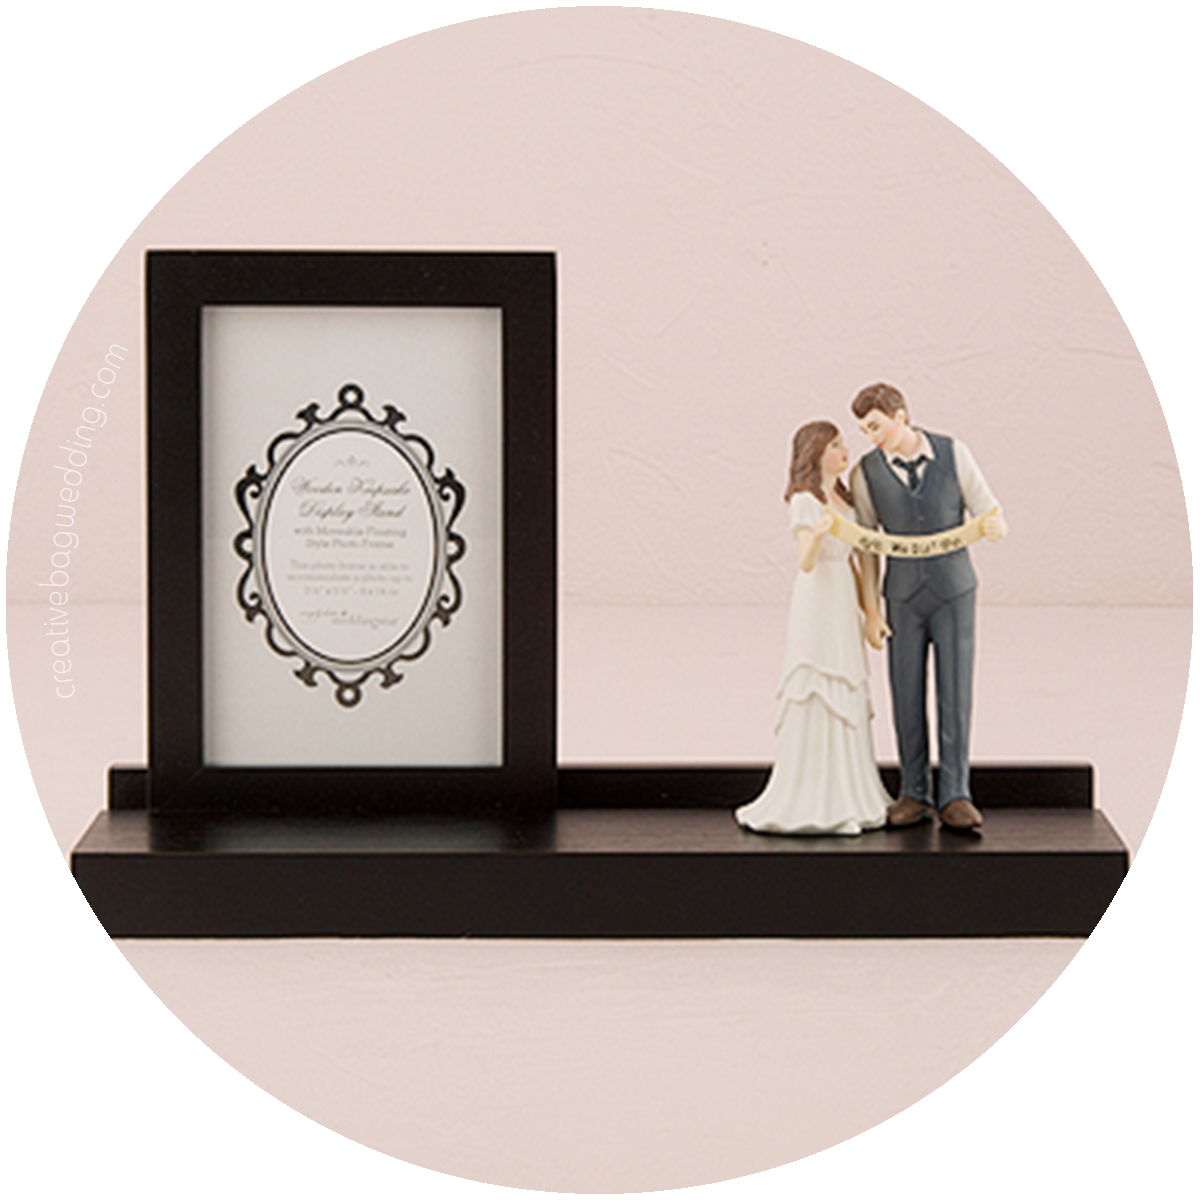 custom cake toppers and display stands from Creative Bag Wedding | Creative Bag